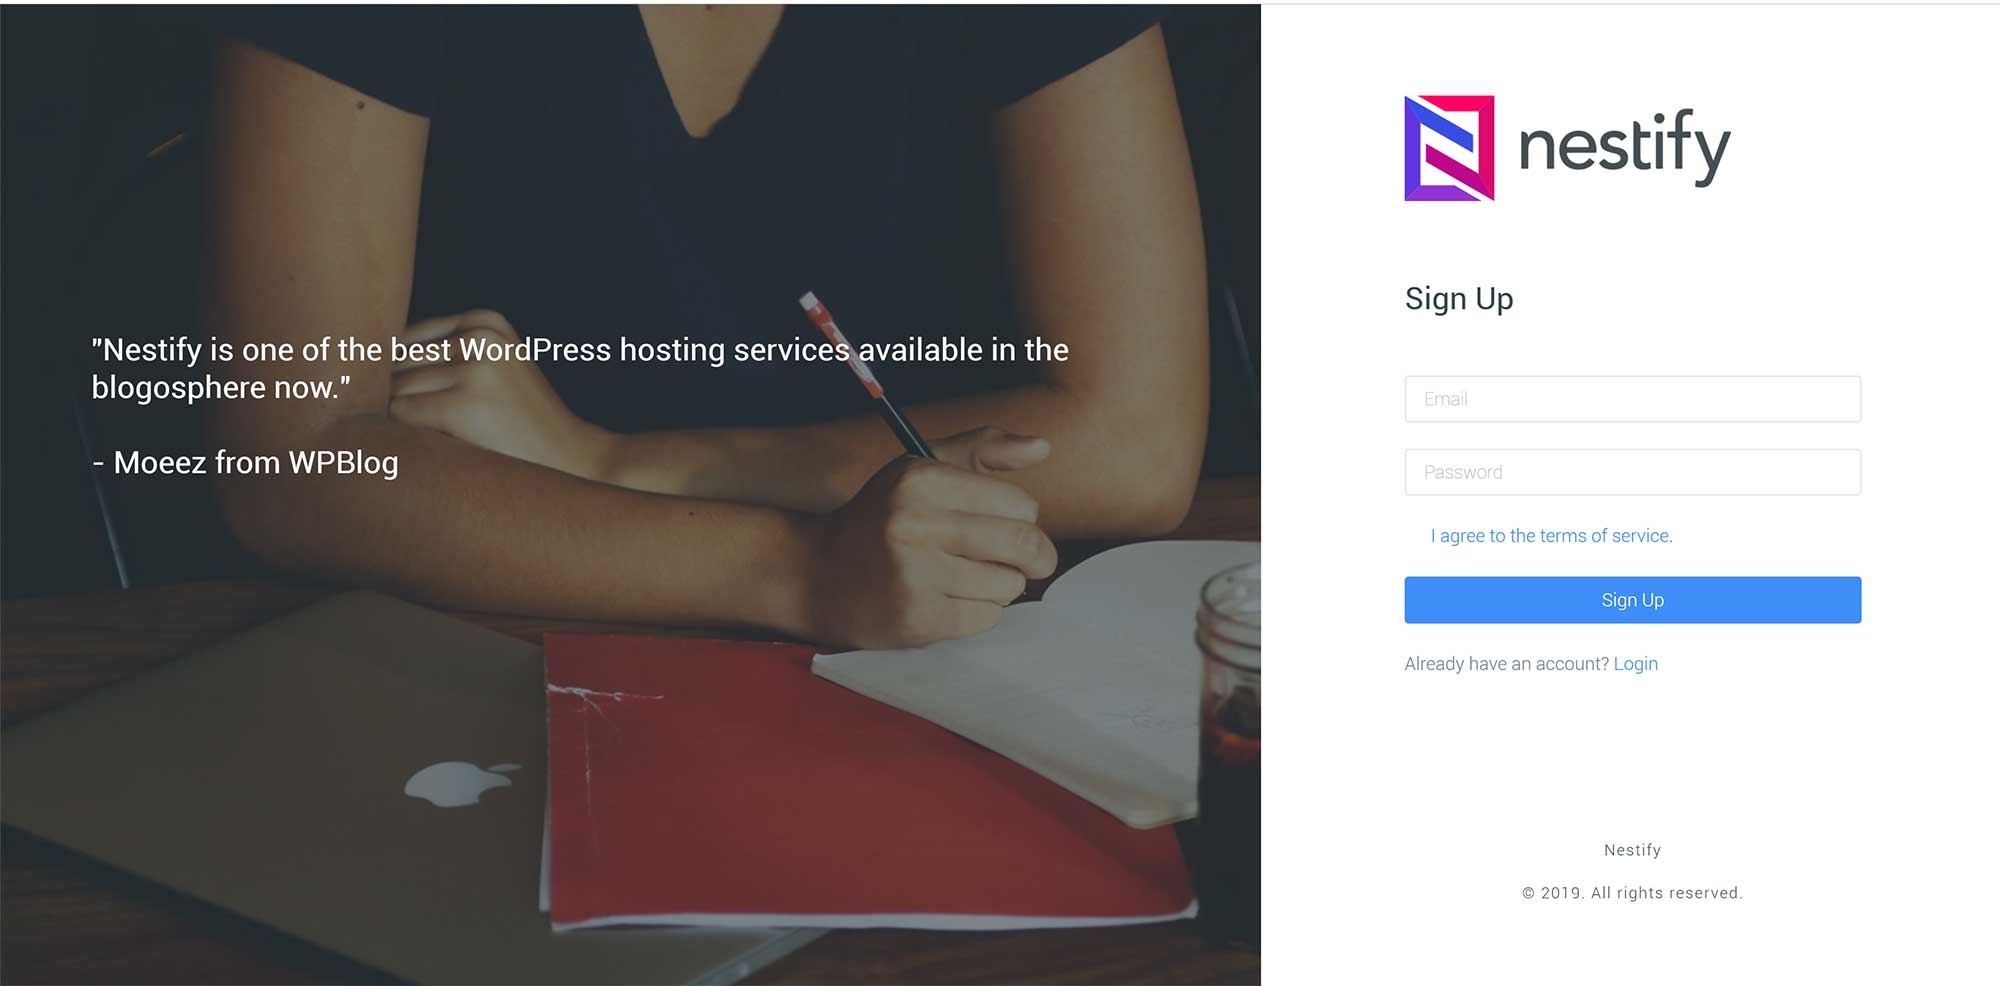 The Nestify Sign Up Page